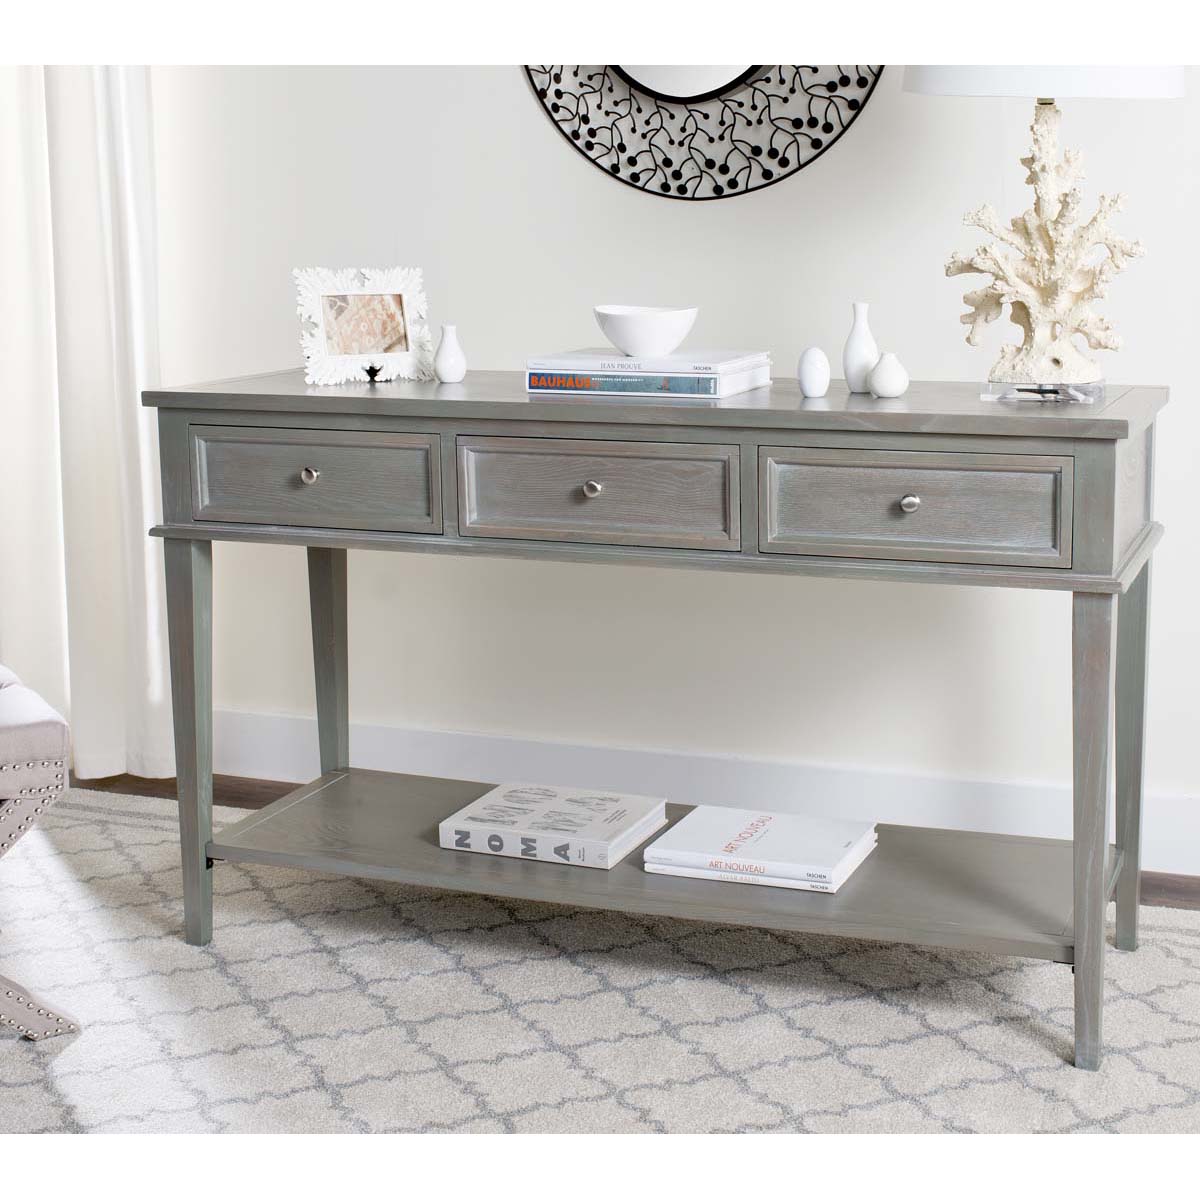 Safavieh Manelin Console With Storage Drawers , AMH6641 - Ash Grey